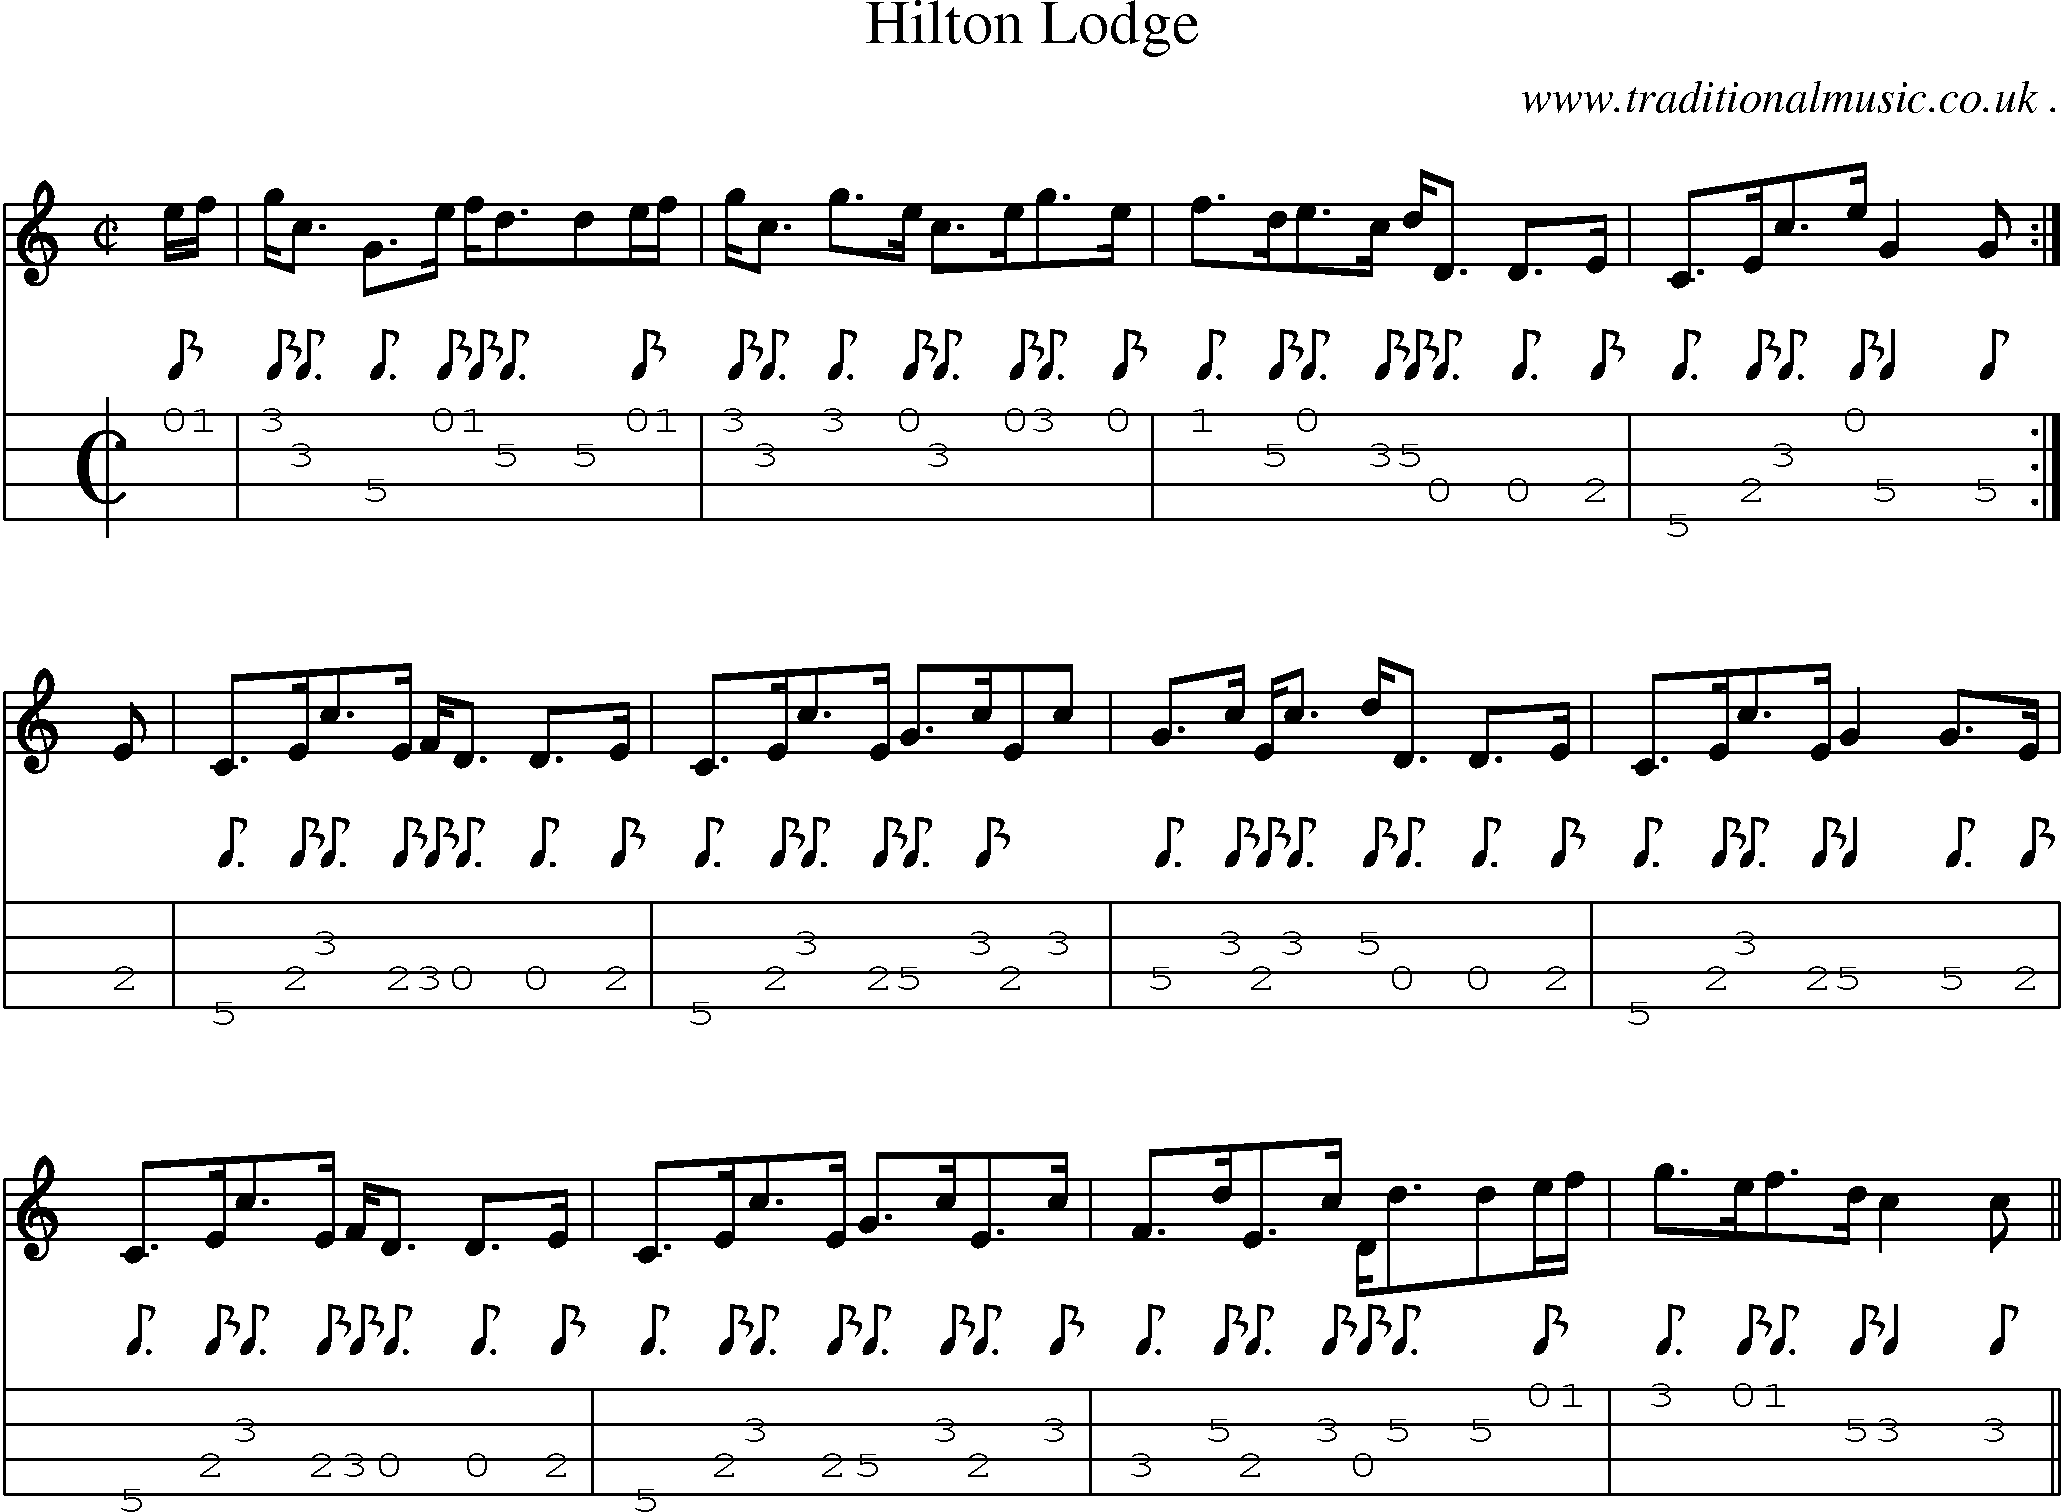 Sheet-music  score, Chords and Mandolin Tabs for Hilton Lodge